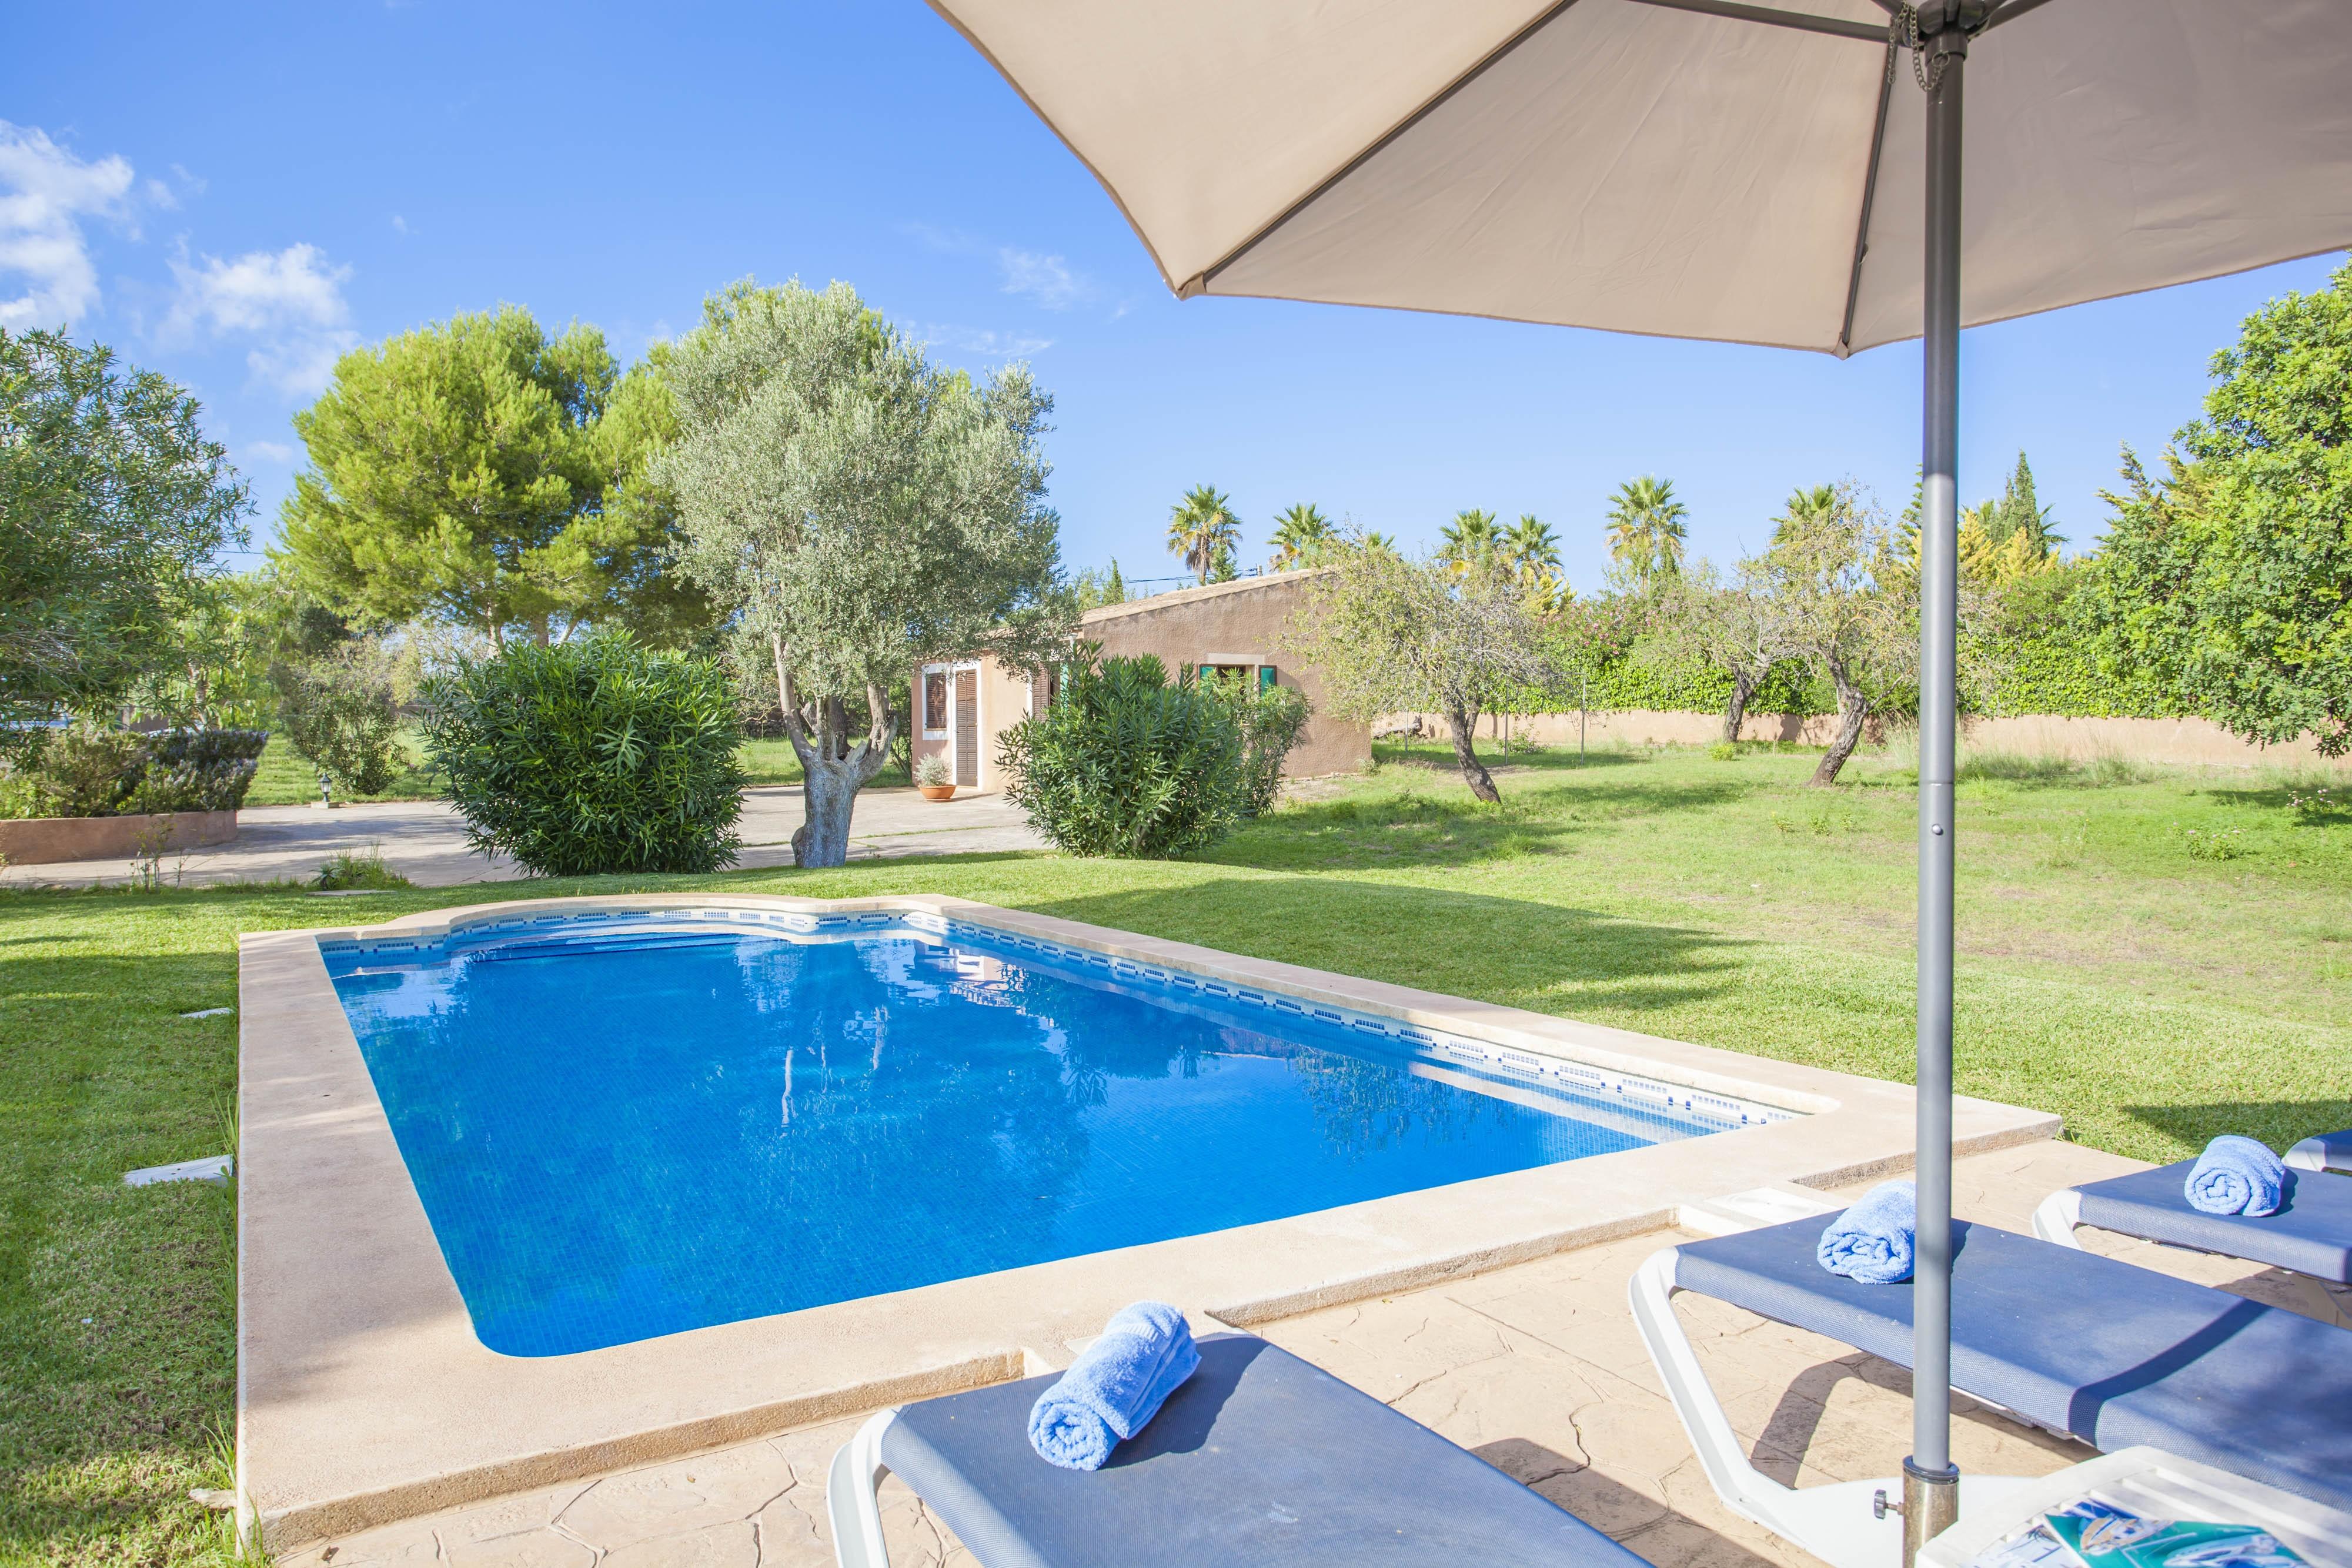 Property Image 1 - CAN ANDREU - Finca with private pool only 2.3 km away from the beach. Free WiFi